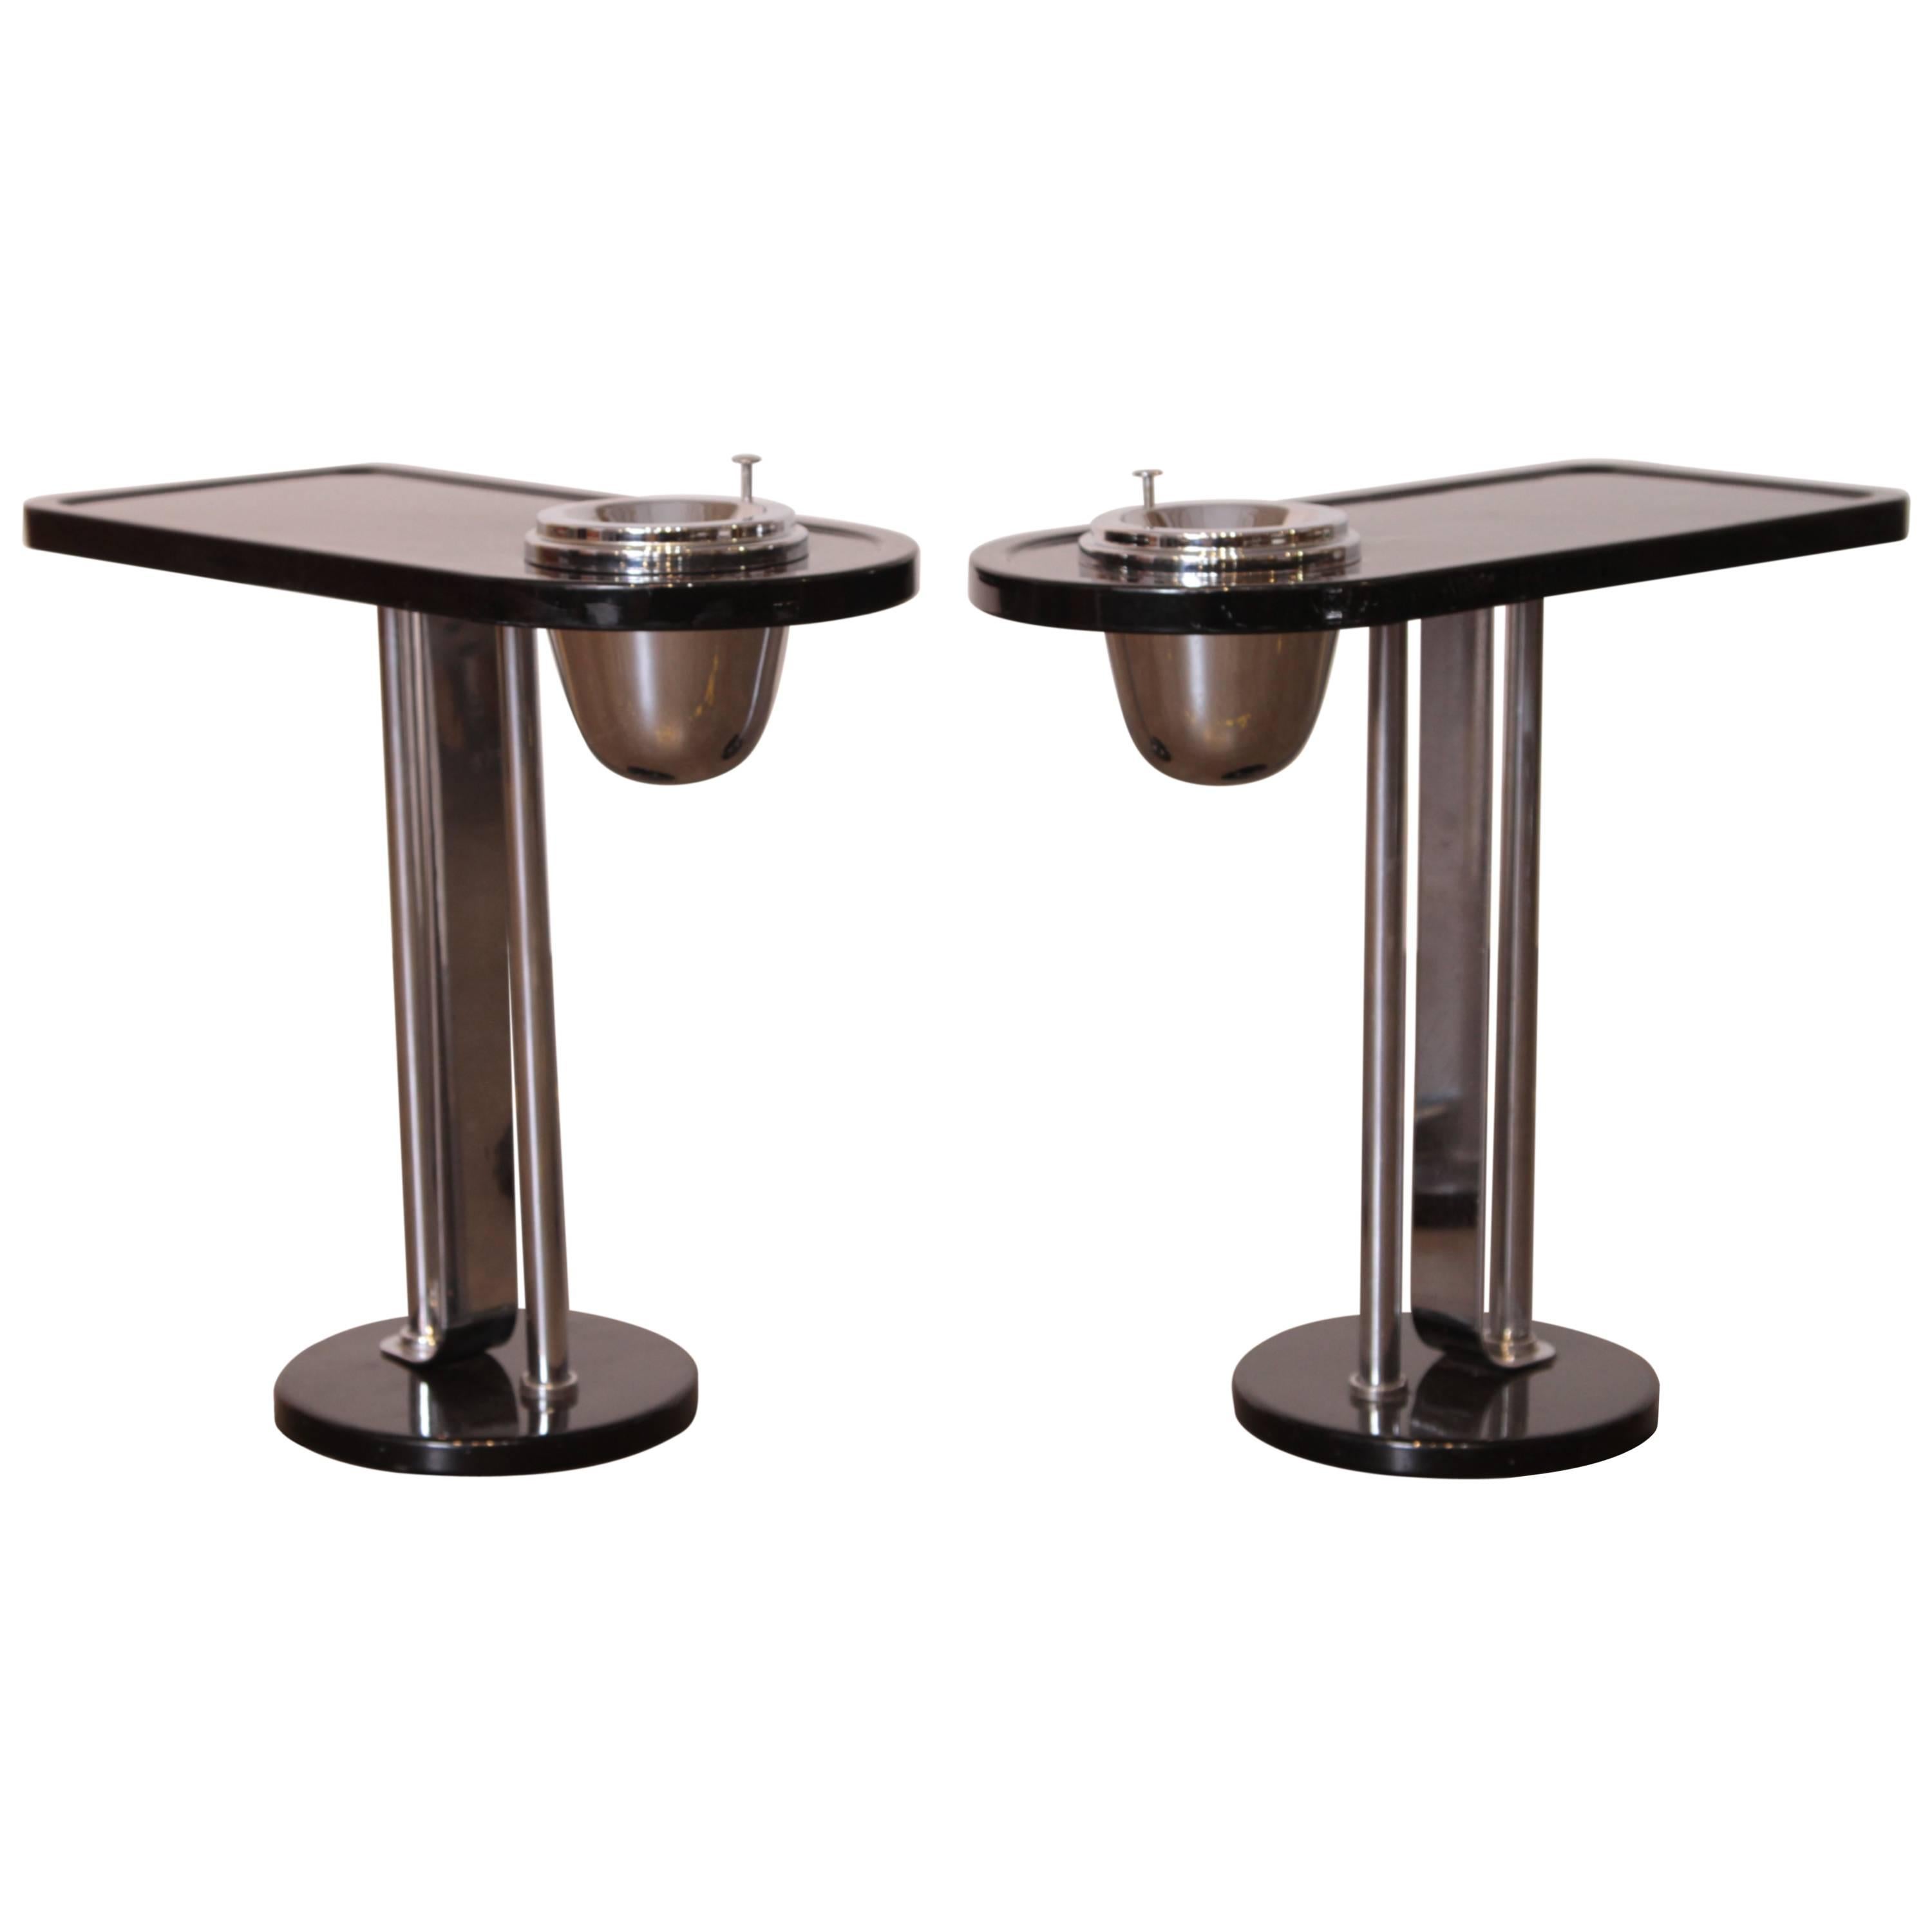 Machine Age Art Deco Wolfgang Hoffmann Smoker Tables for Howell, Signed Pair For Sale